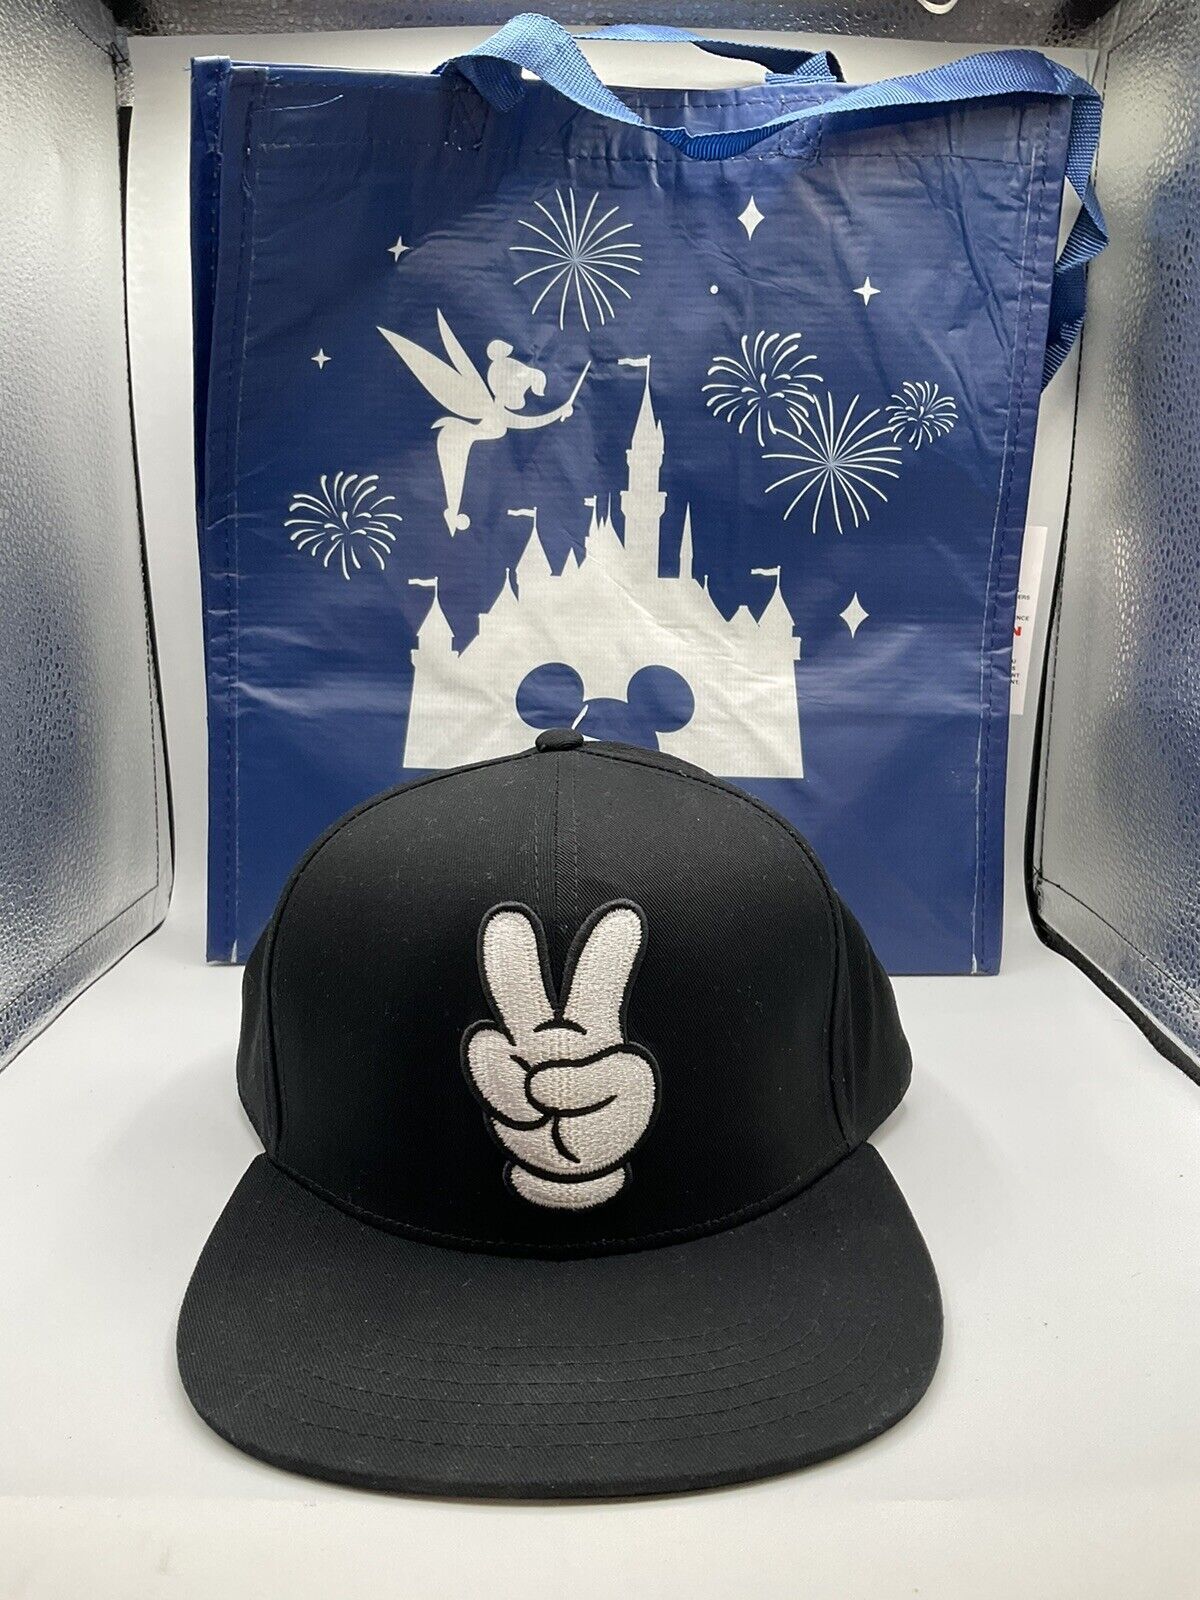 Disneyland Mickey Mouse Peace Sign Cap Black With White Embroidered NEW W/ Bag